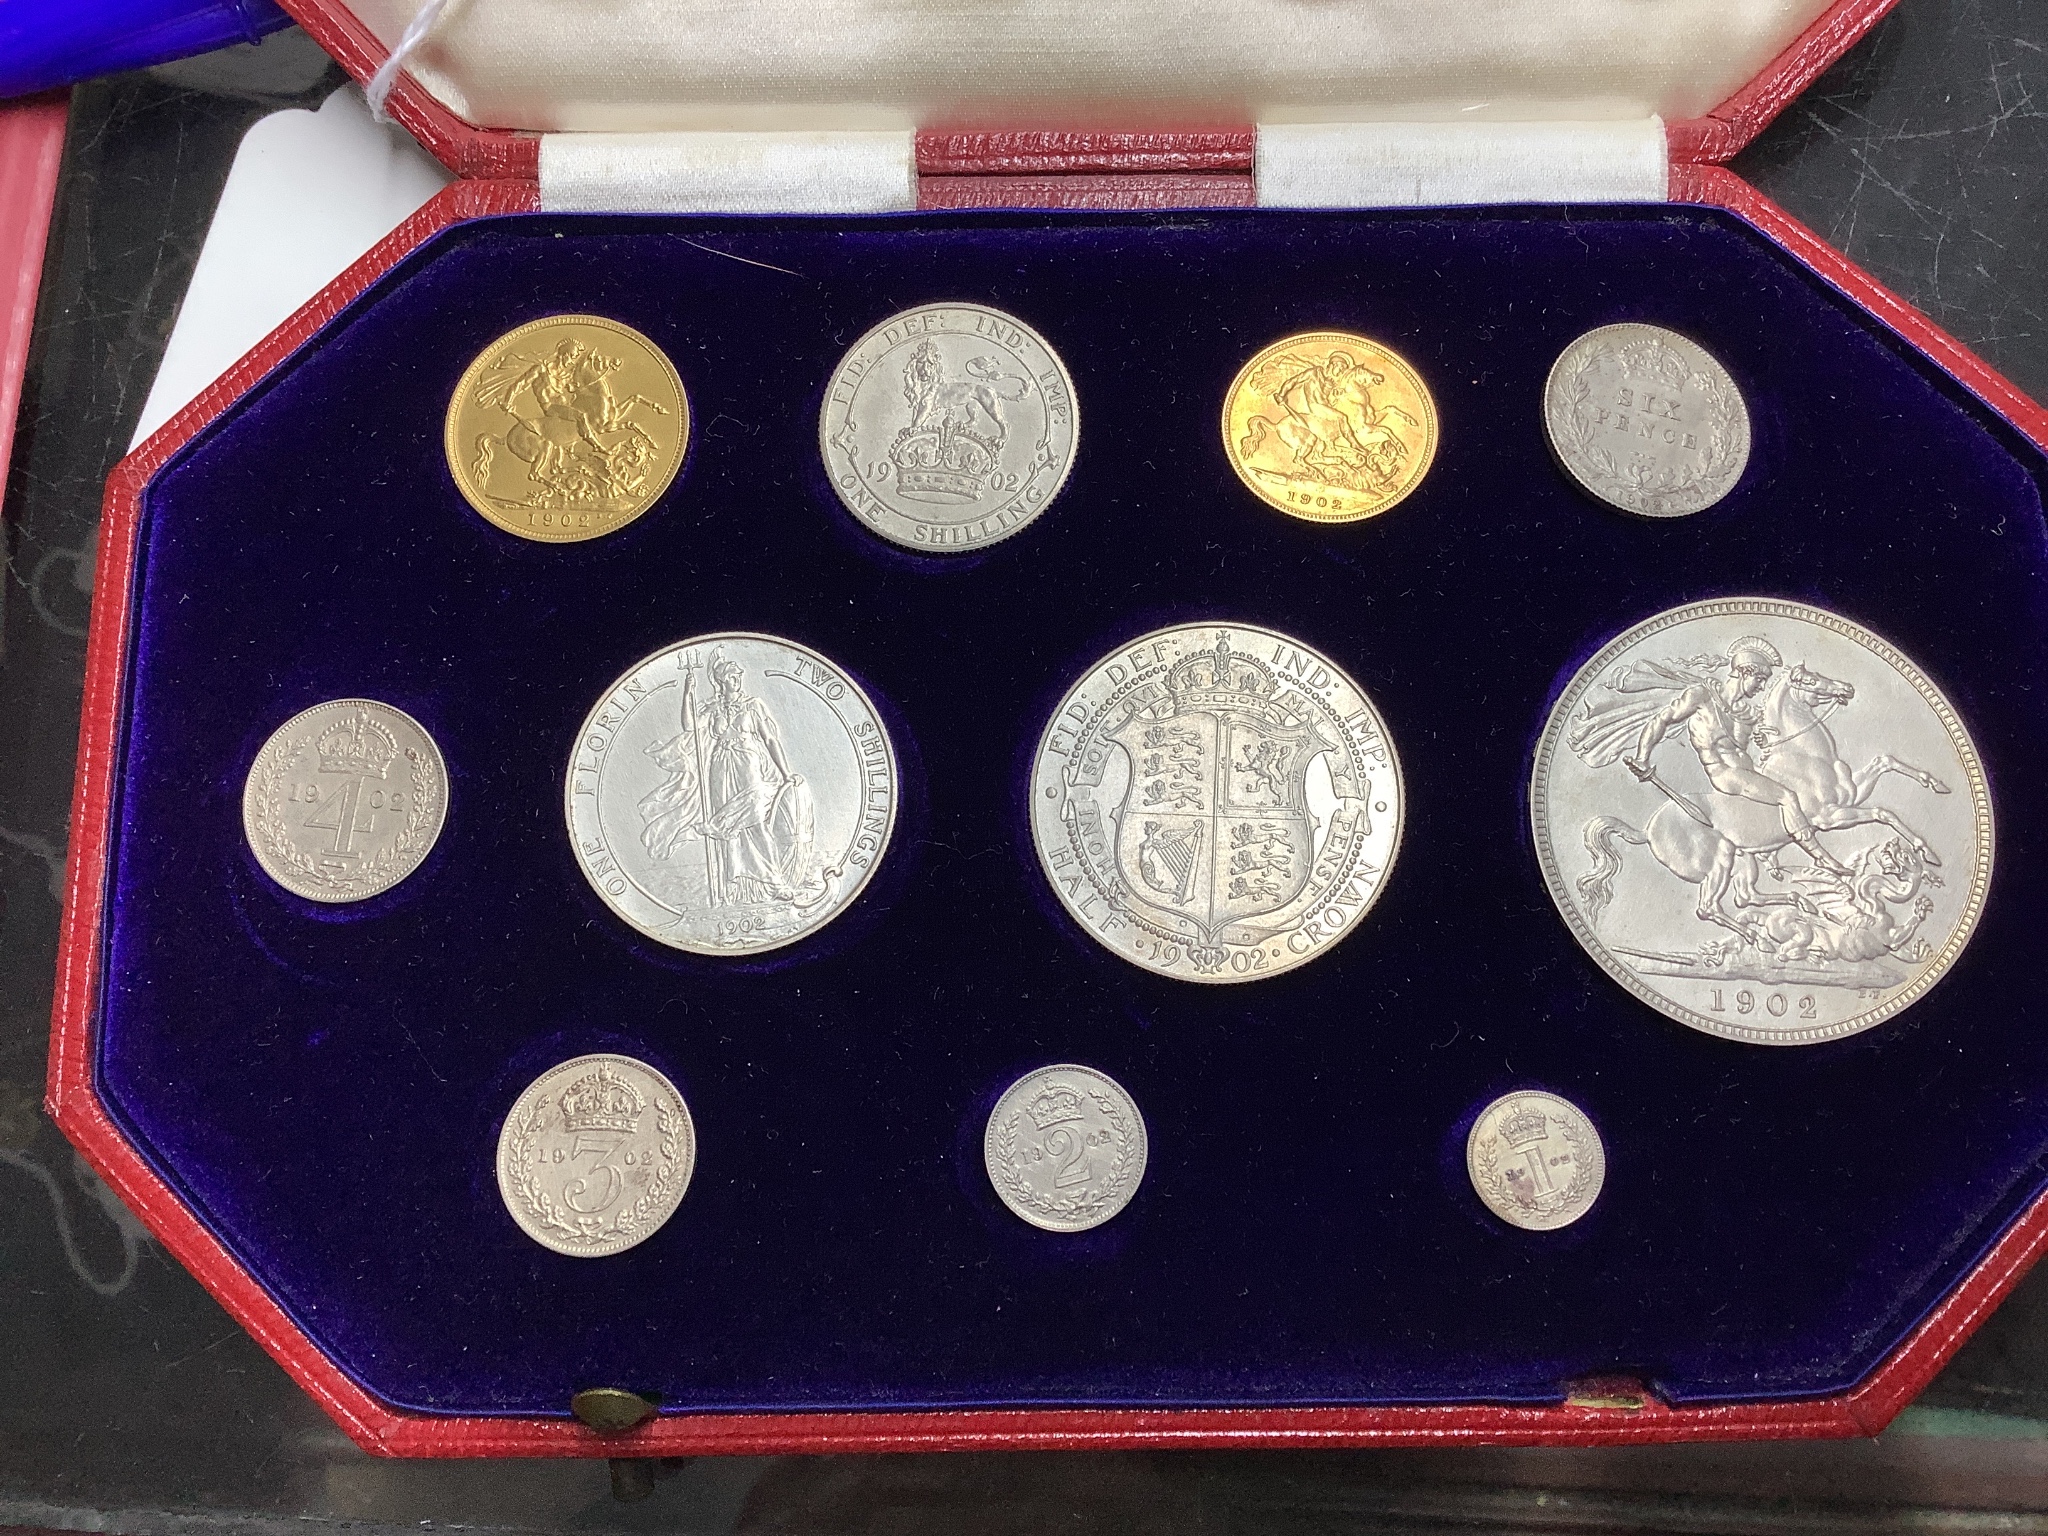 A cased Edward VII eleven-coin specimen set, matt surface, 1902, full gold sovereign through to Maundy 1d, hairlines otherwise near FDC